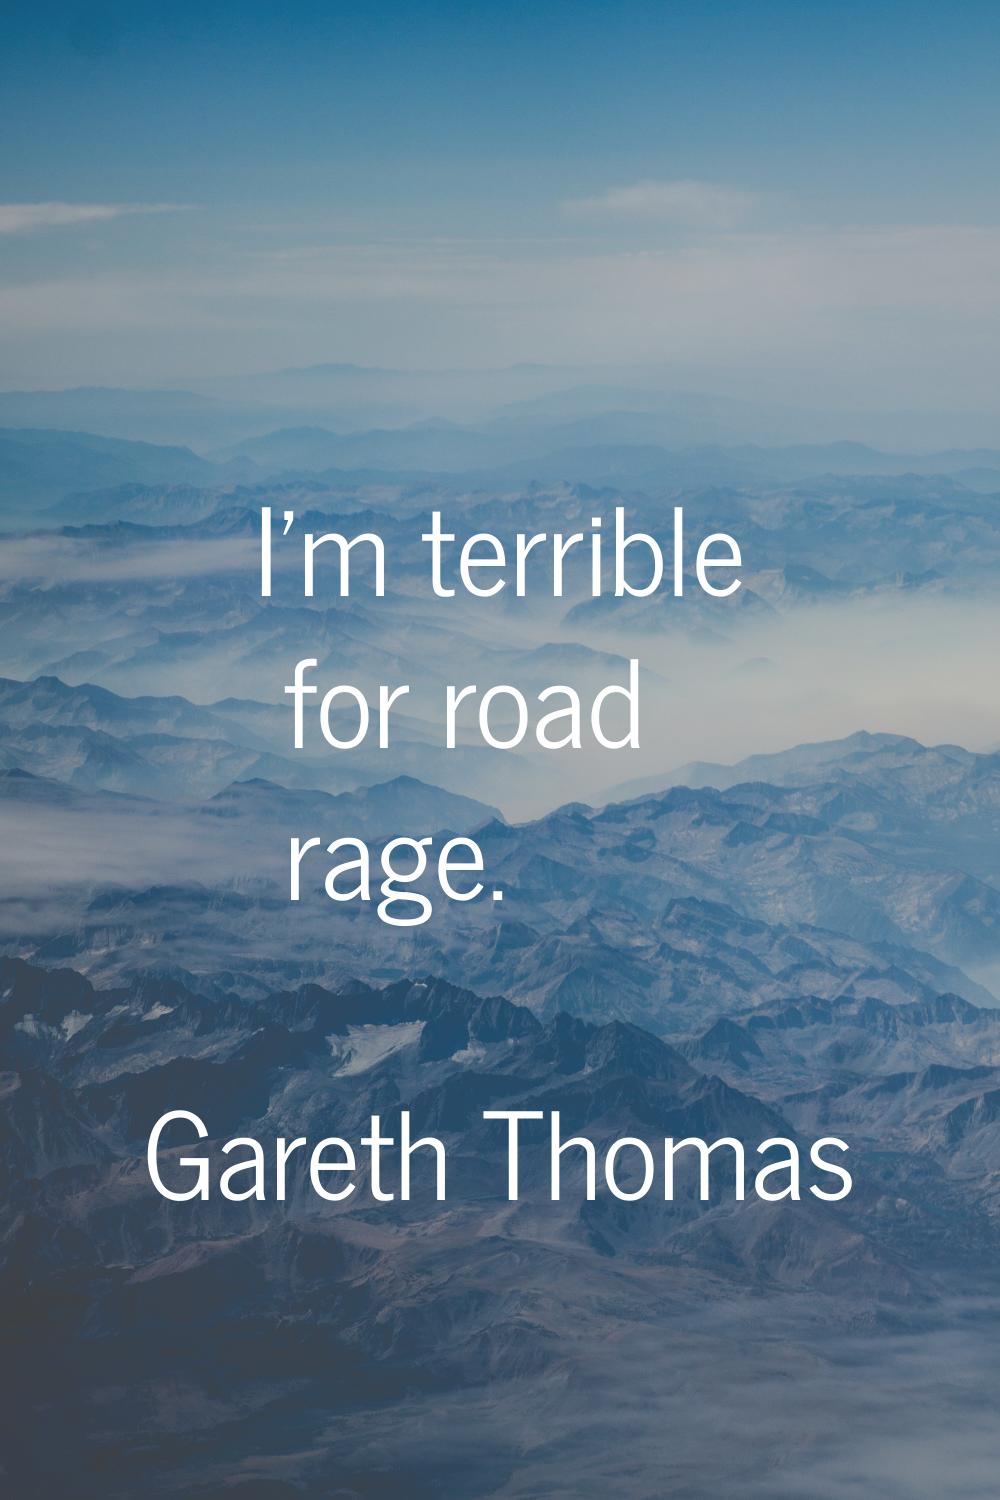 I'm terrible for road rage.